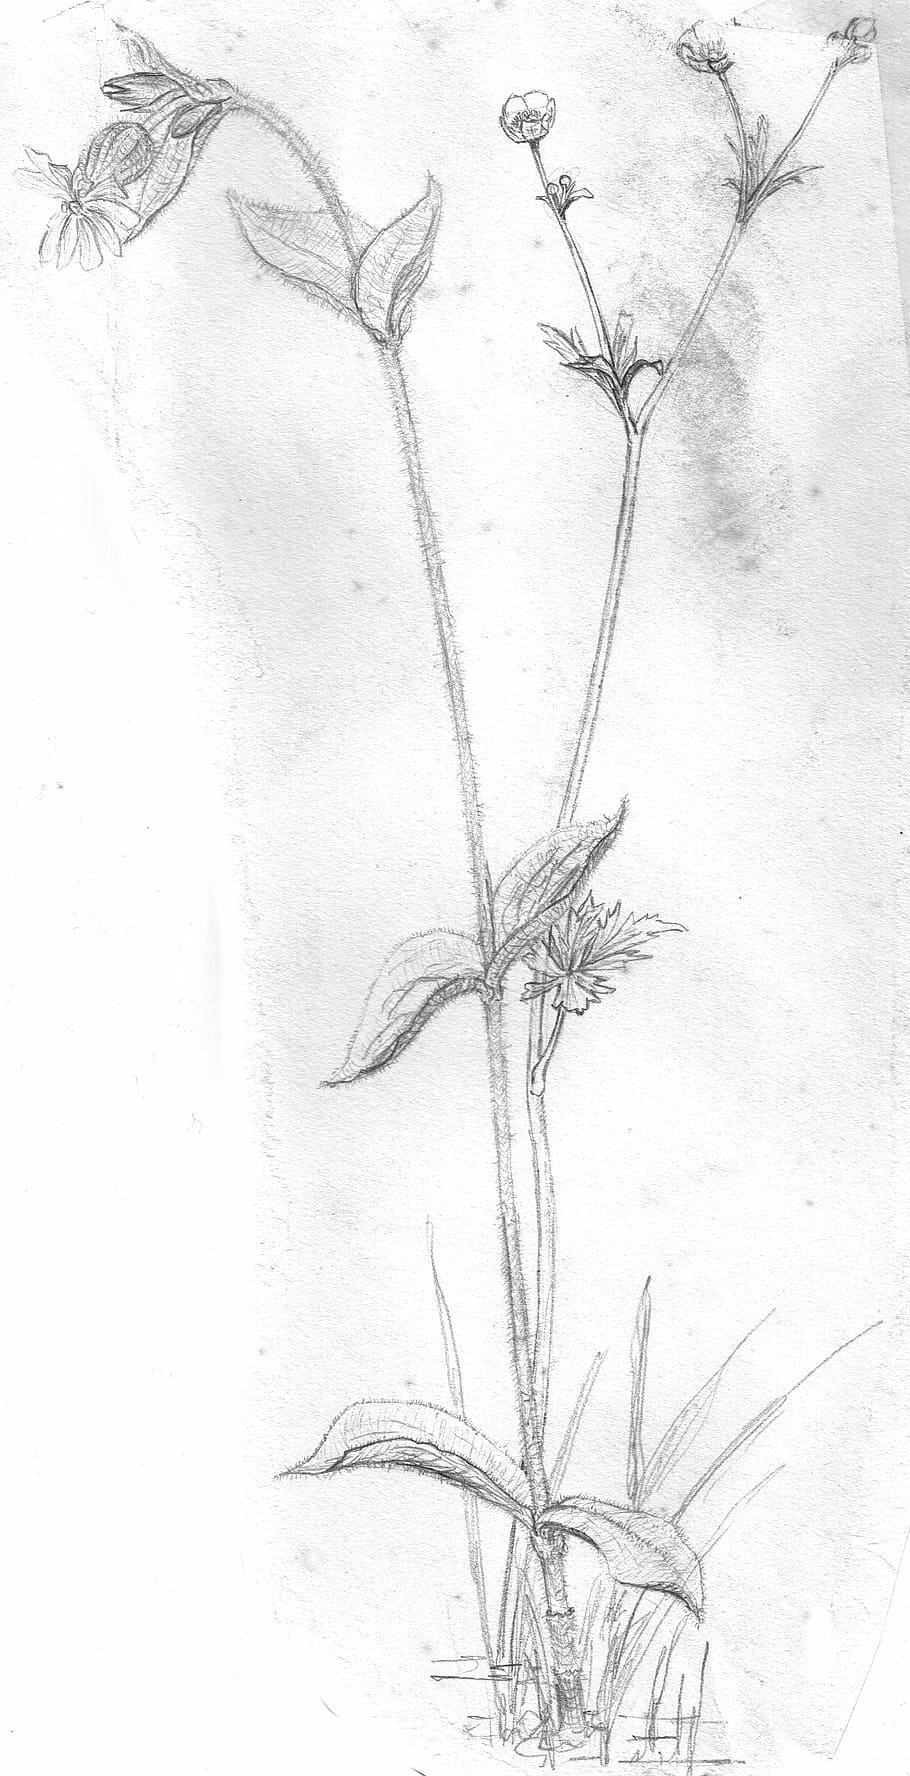 flower, plant, blossom, bloom, sketch, drawing, pencil drawing, black and white, hand drawn sketch, nature